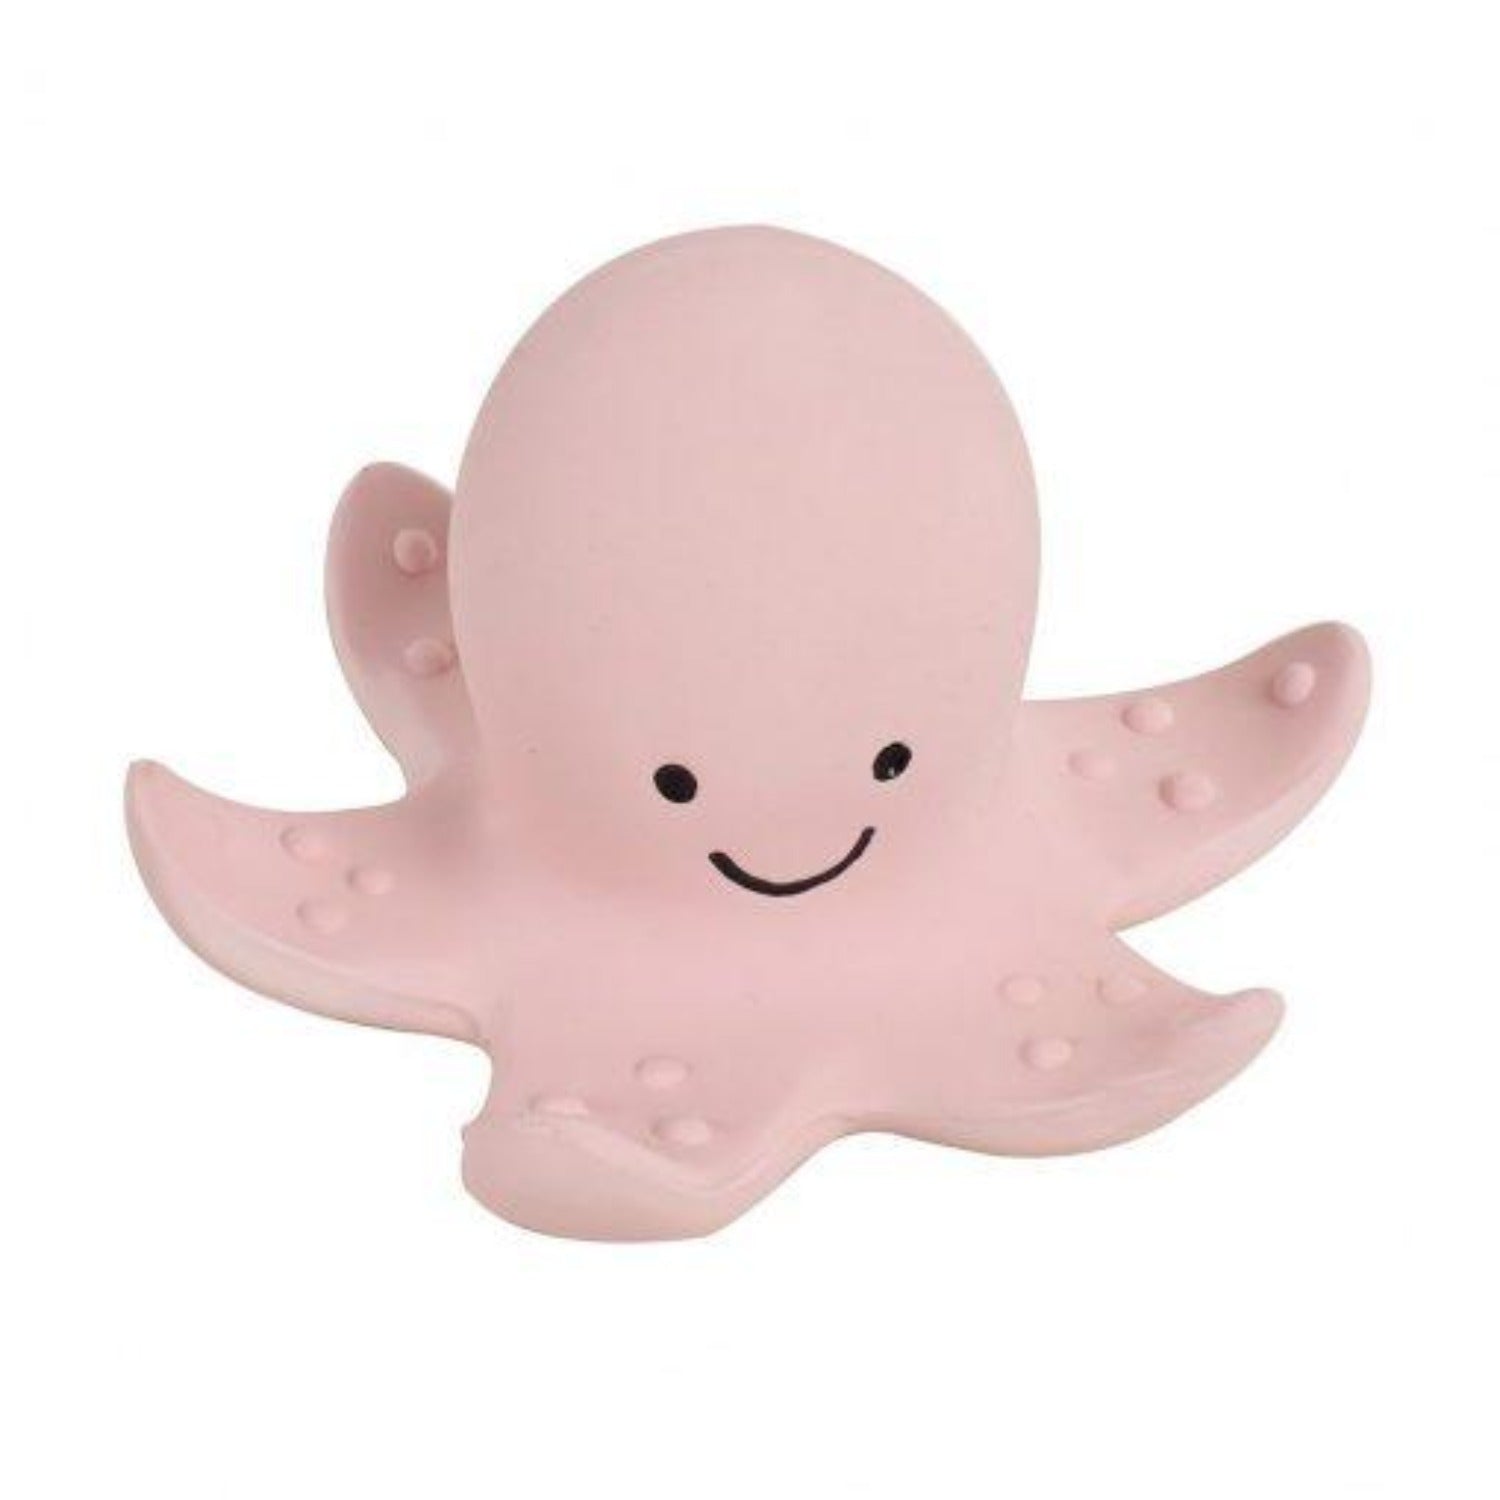 Natural Material teether and octopus bath toy